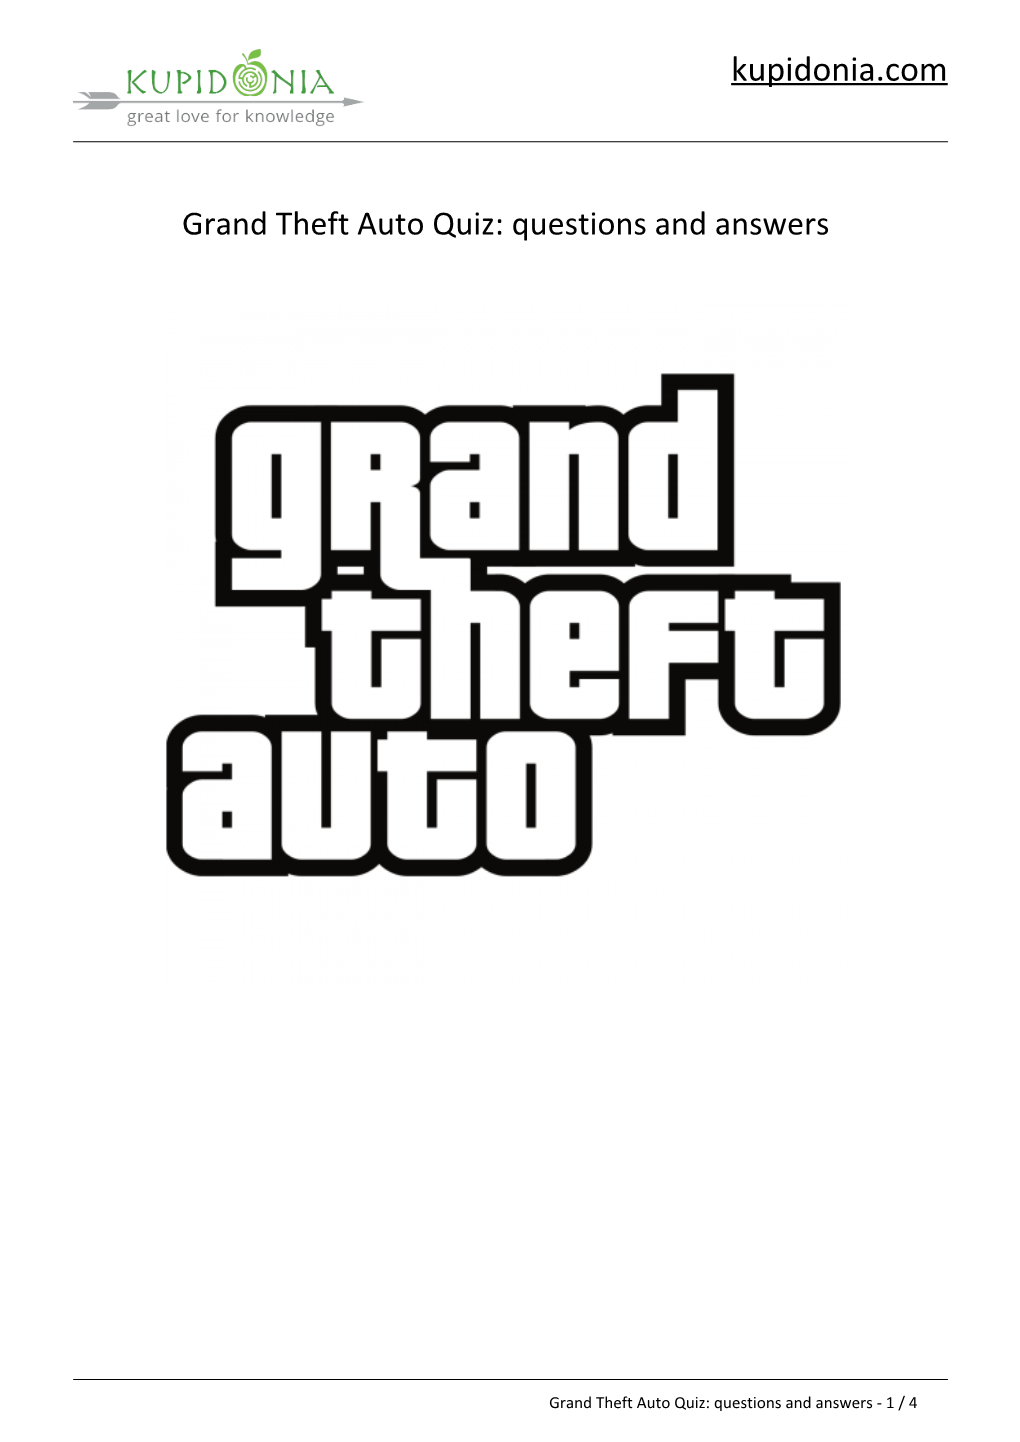 Grand Theft Auto Quiz: Questions and Answers